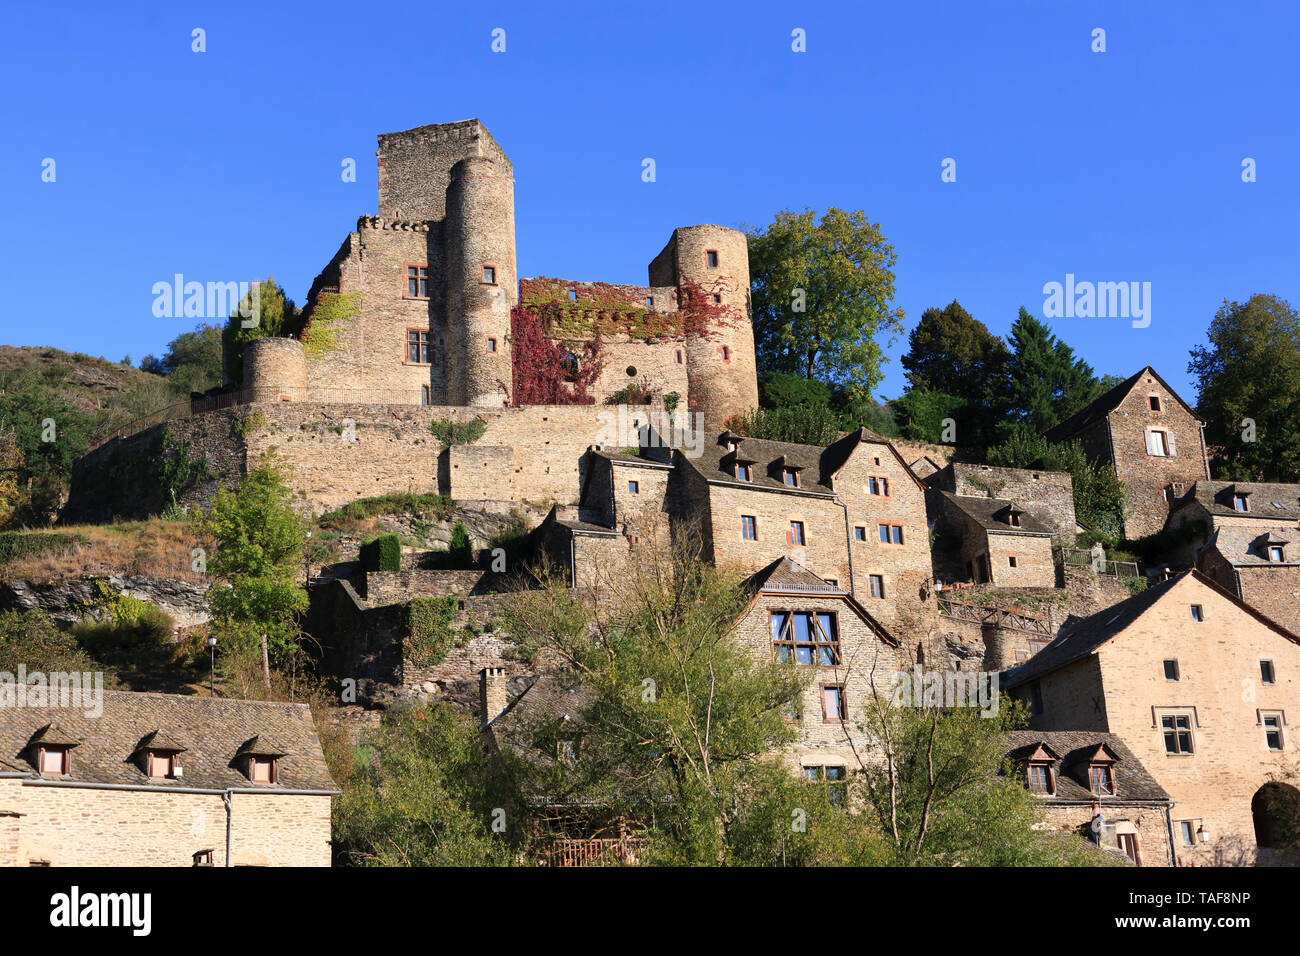 village and the castle (Château de Belcastel) are situated on the Aveyron River, Belcastel, Aveyron, France Stock Photo